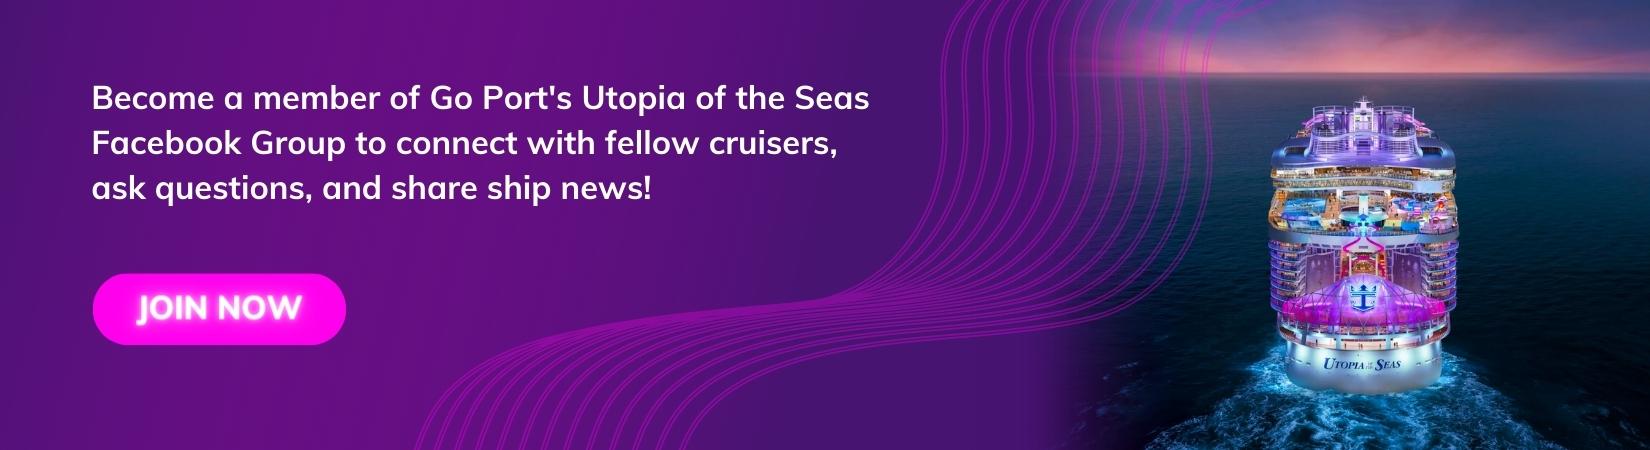 Purple background and white font banner that reads "Become a member of Go Port's Utopia of the Seas Facebook Groups to connect with fellow cruisers, ask questions, and share ship news!", image of Utopia of the Seas ship on the right side, with a neon pink button that says "JOIN NOW"